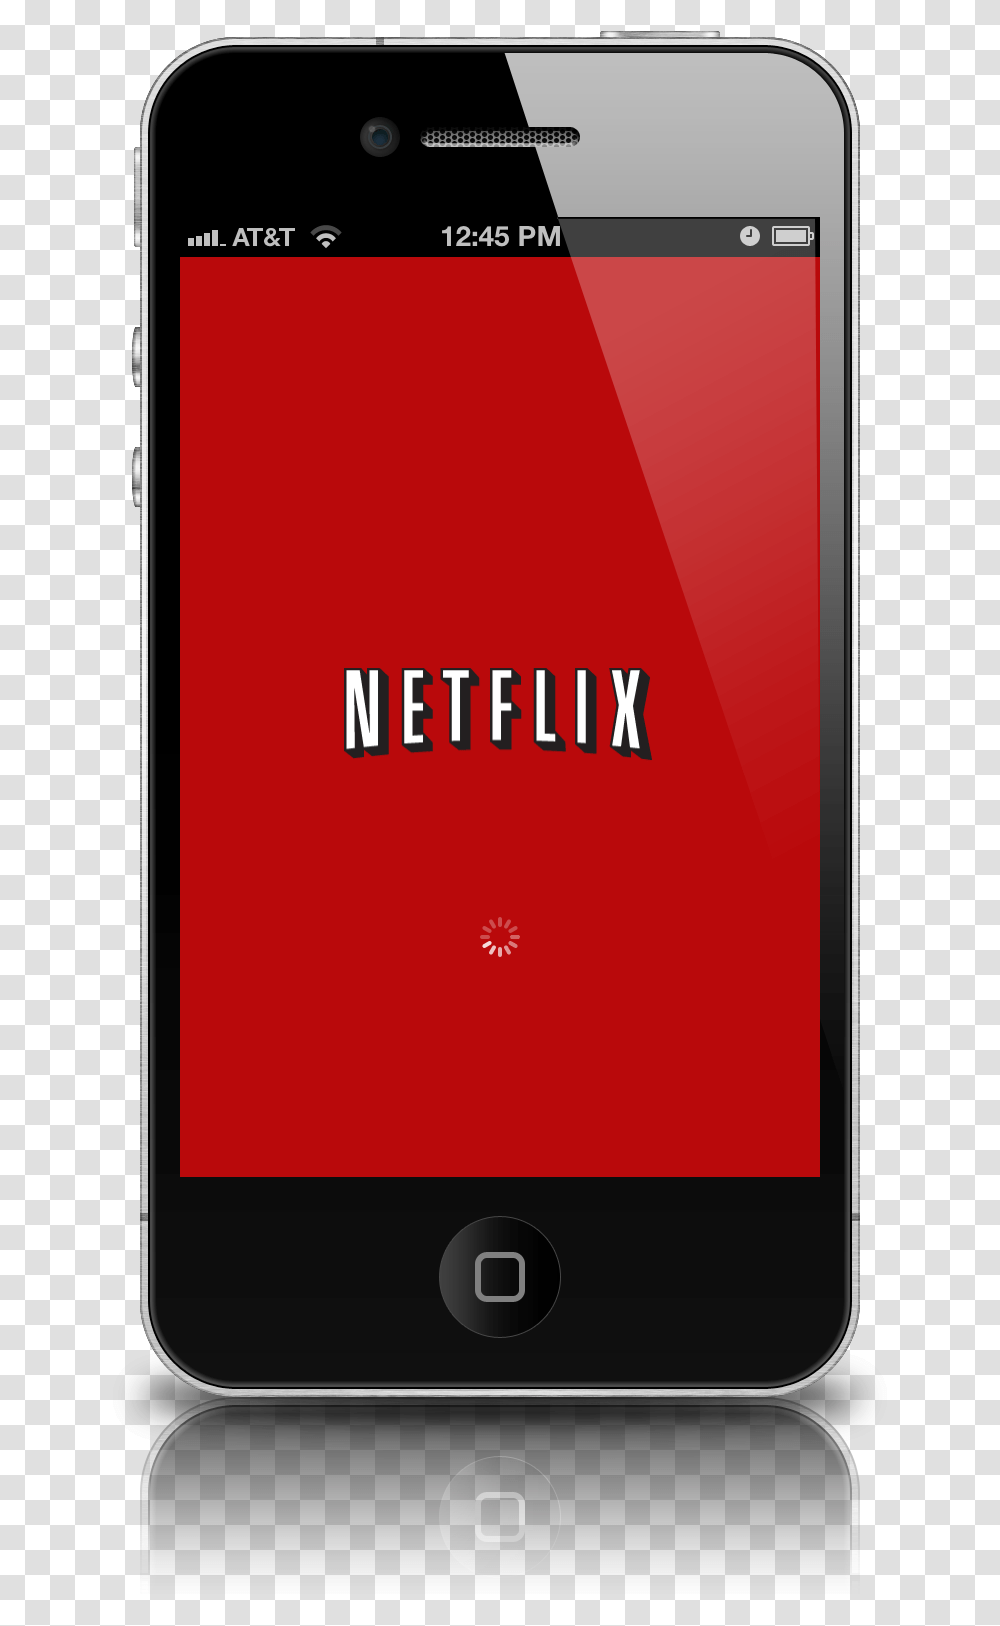 Download Netflix Iphone App Icon Iphone With Netflix, Mobile Phone, Electronics, Cell Phone, Text Transparent Png